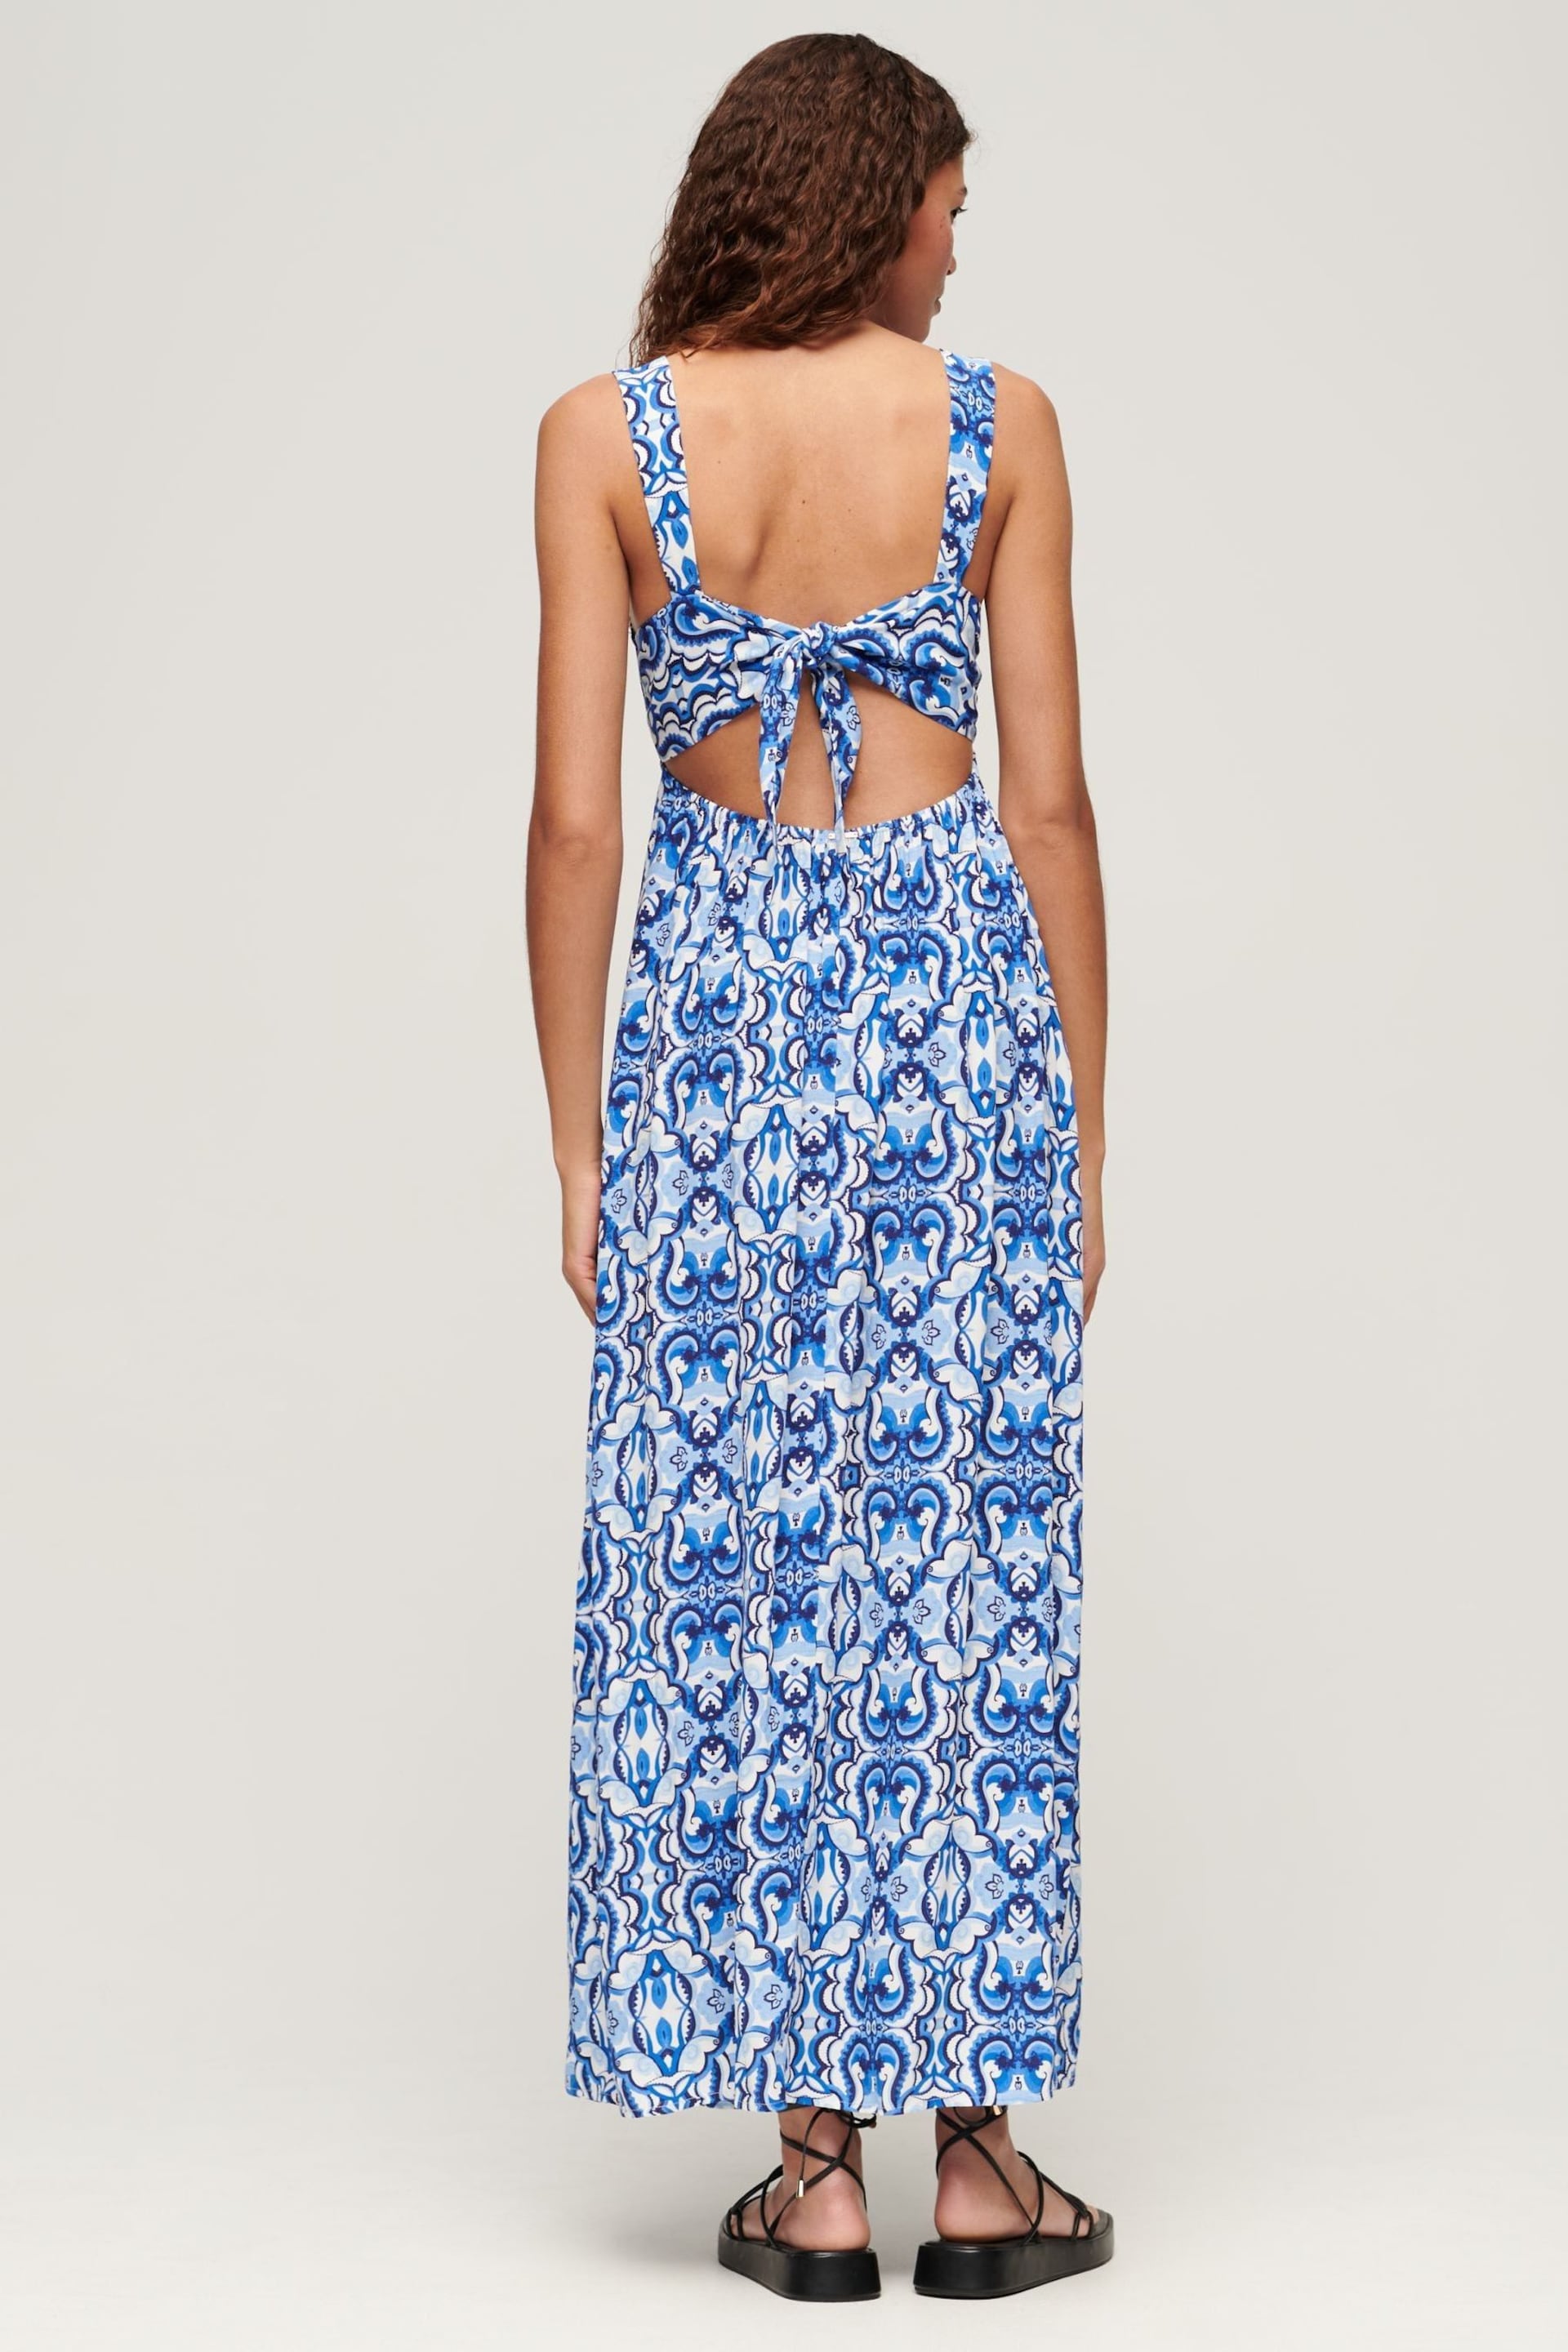 Superdry Blue Tie Maxi Dress - Image 5 of 10